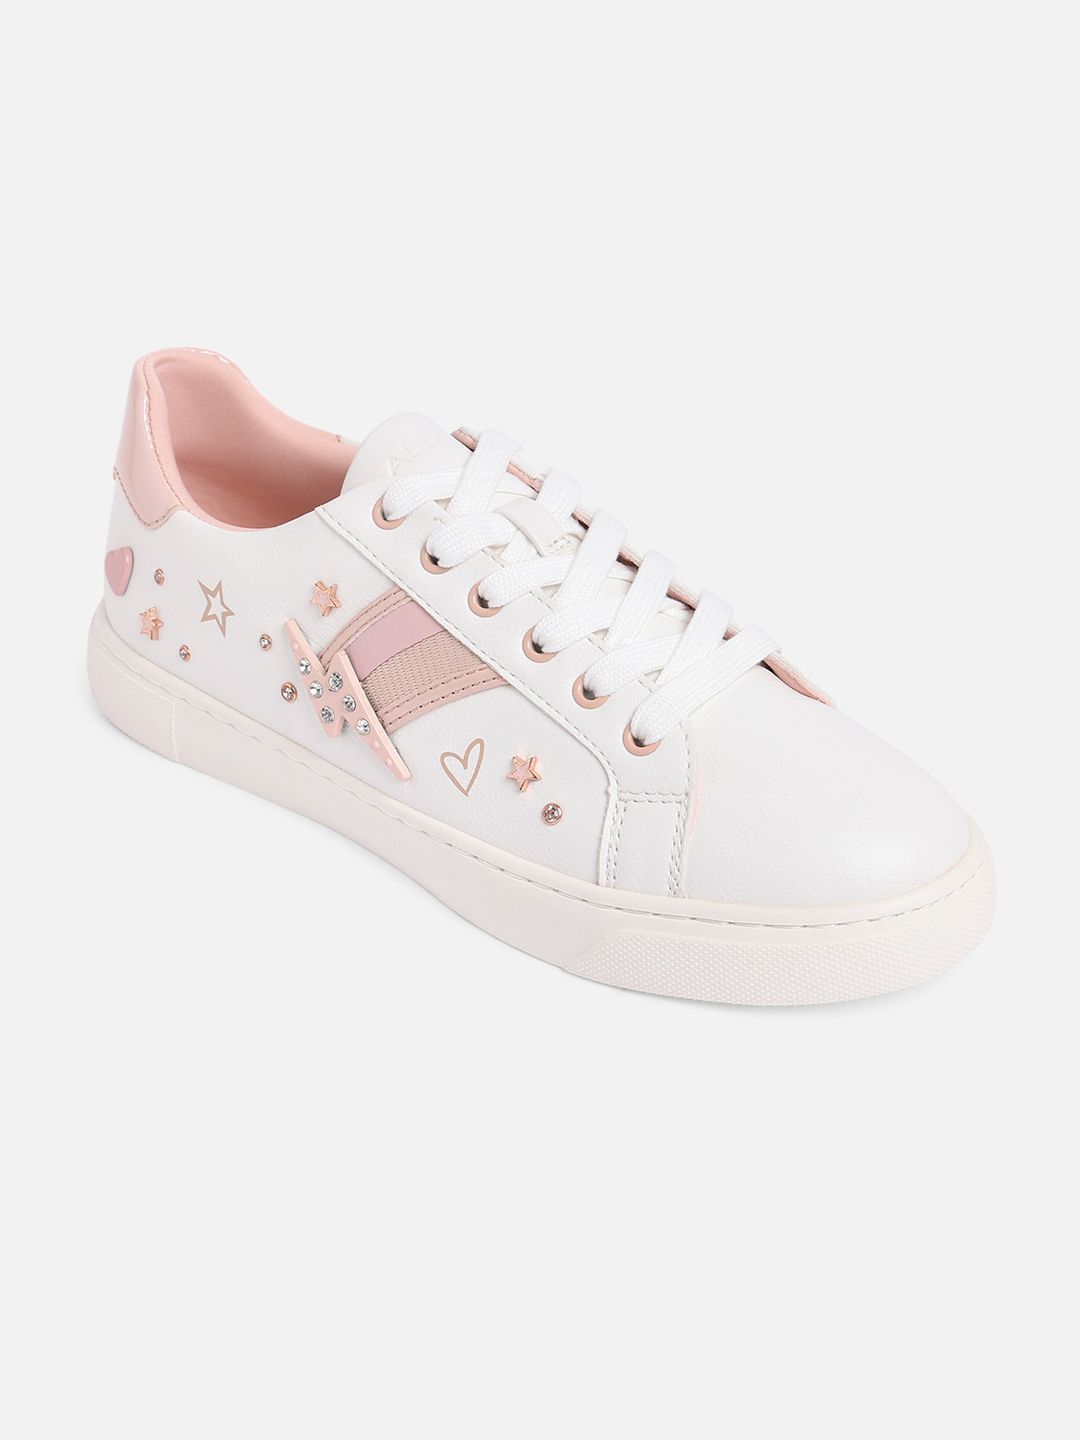 ALDO Women White & Pink Printed Sneakers Price in India